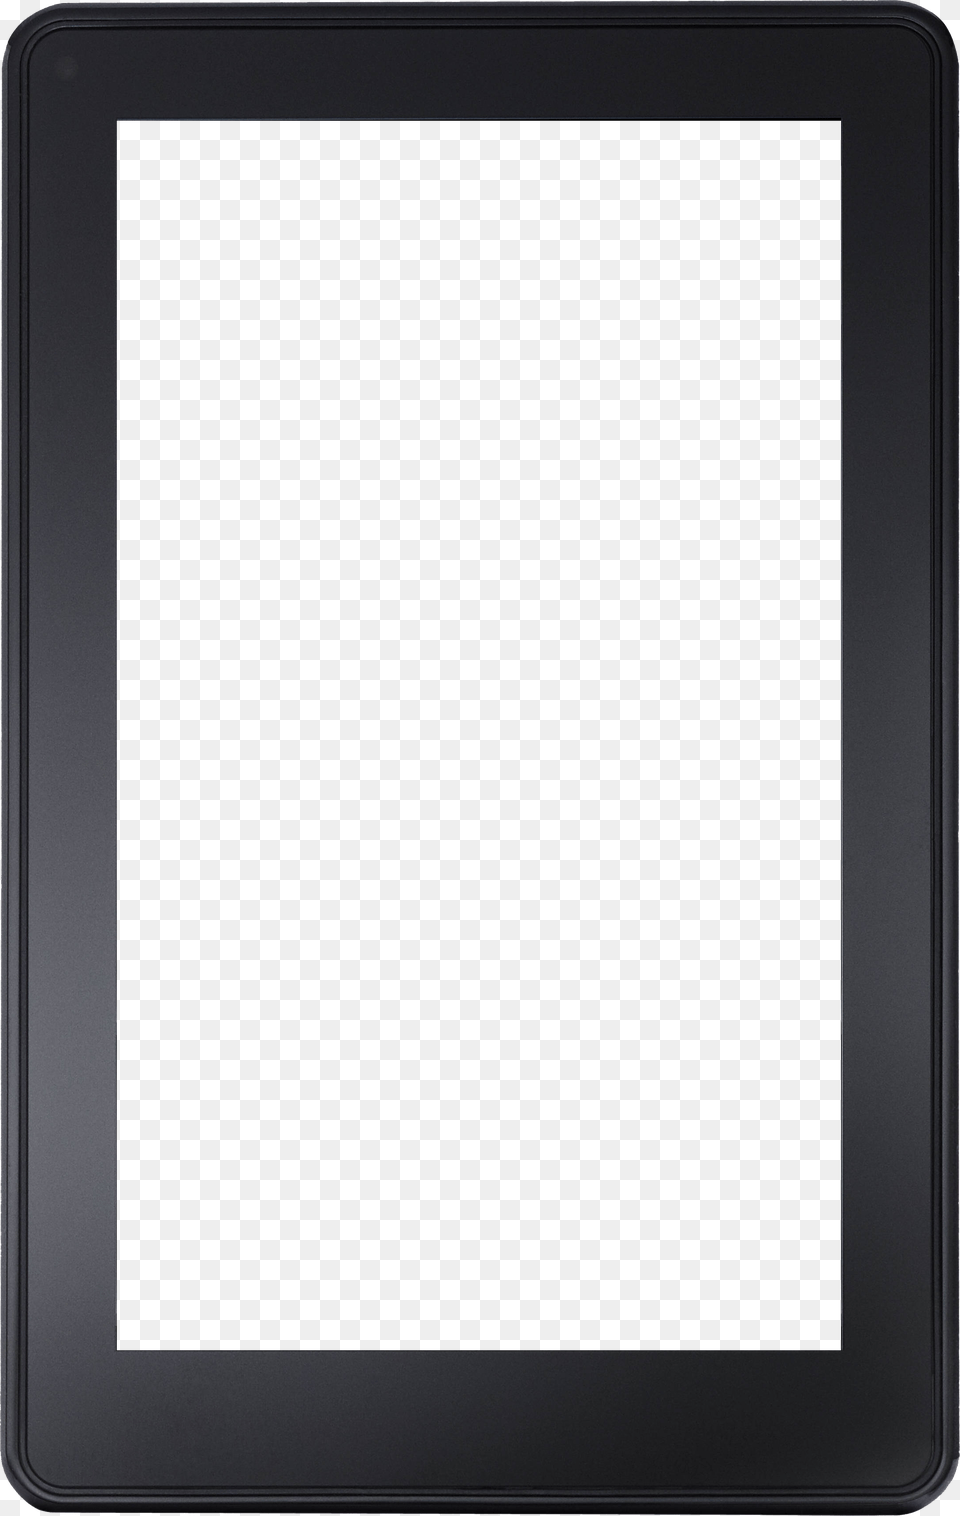 Tablet, Computer, Electronics, Mobile Phone, Phone Png